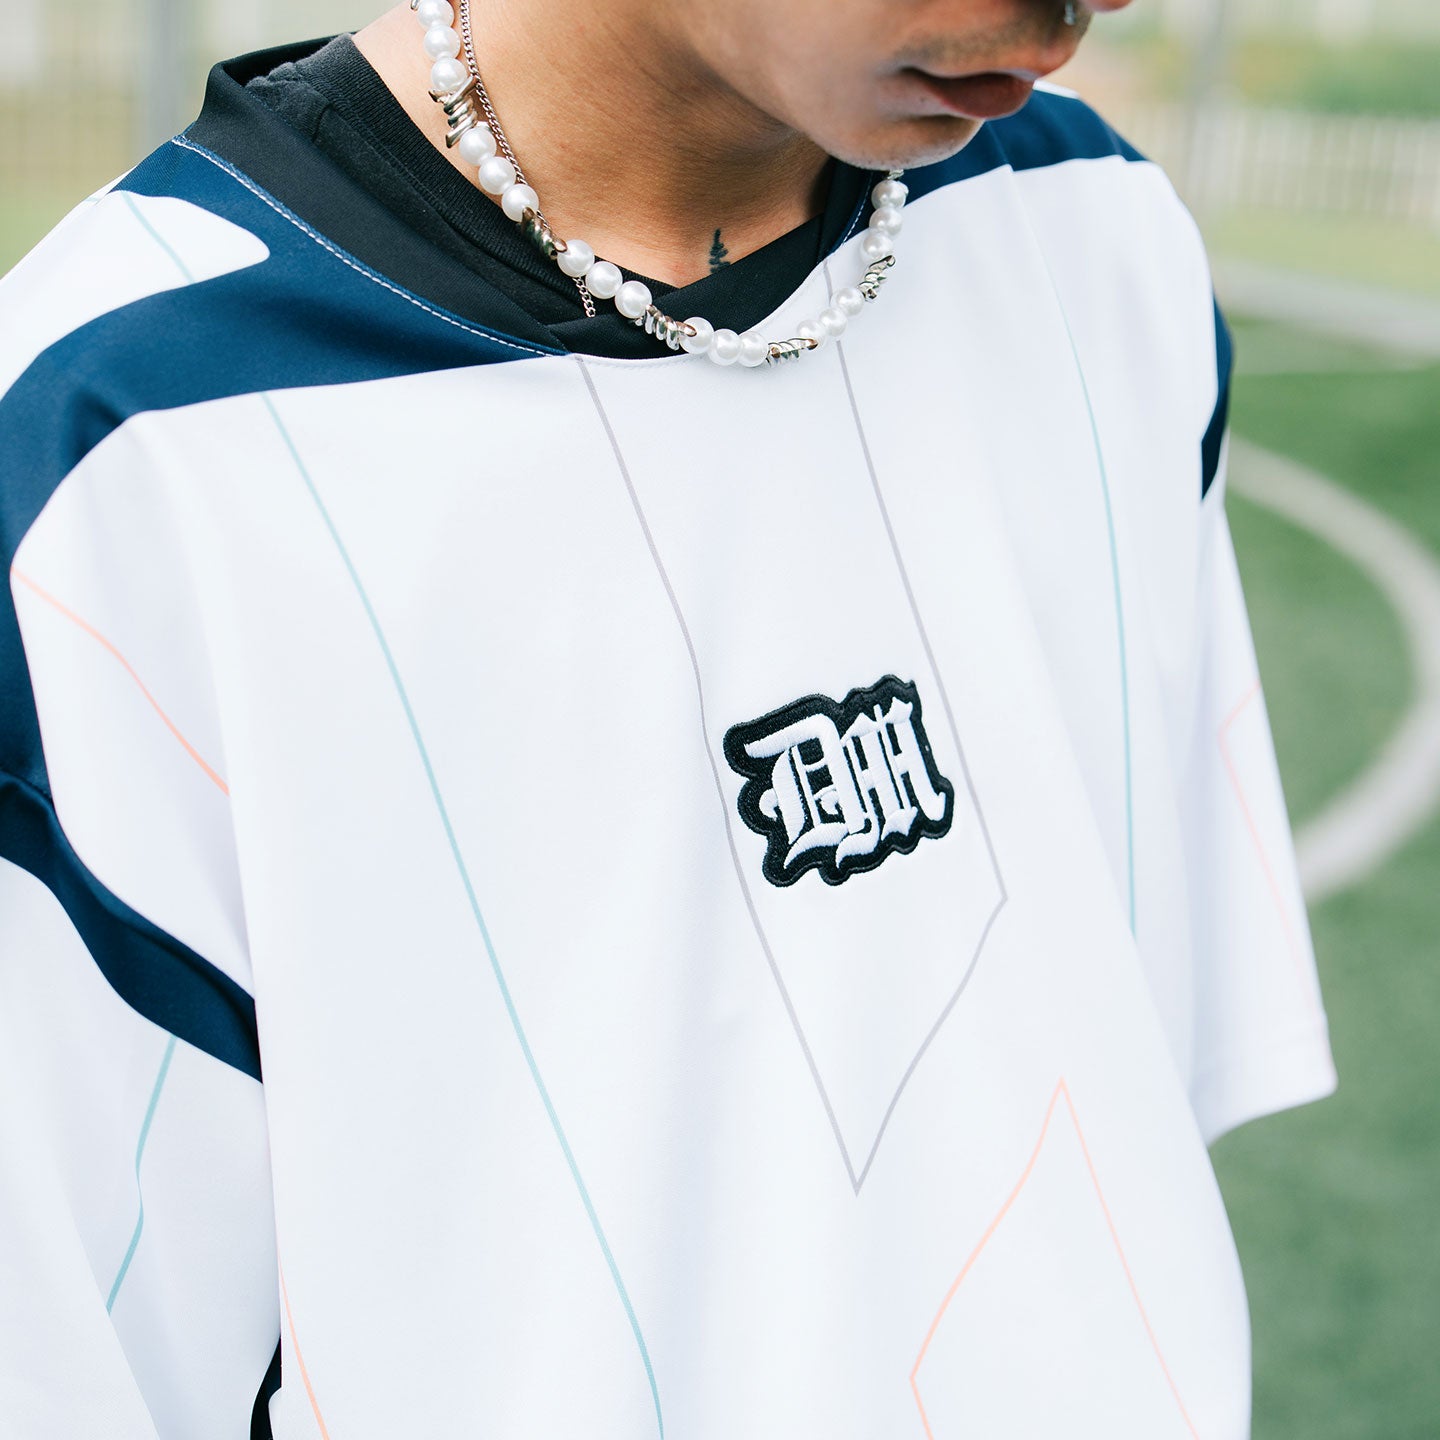 Eclectic Oversized Jersey - White